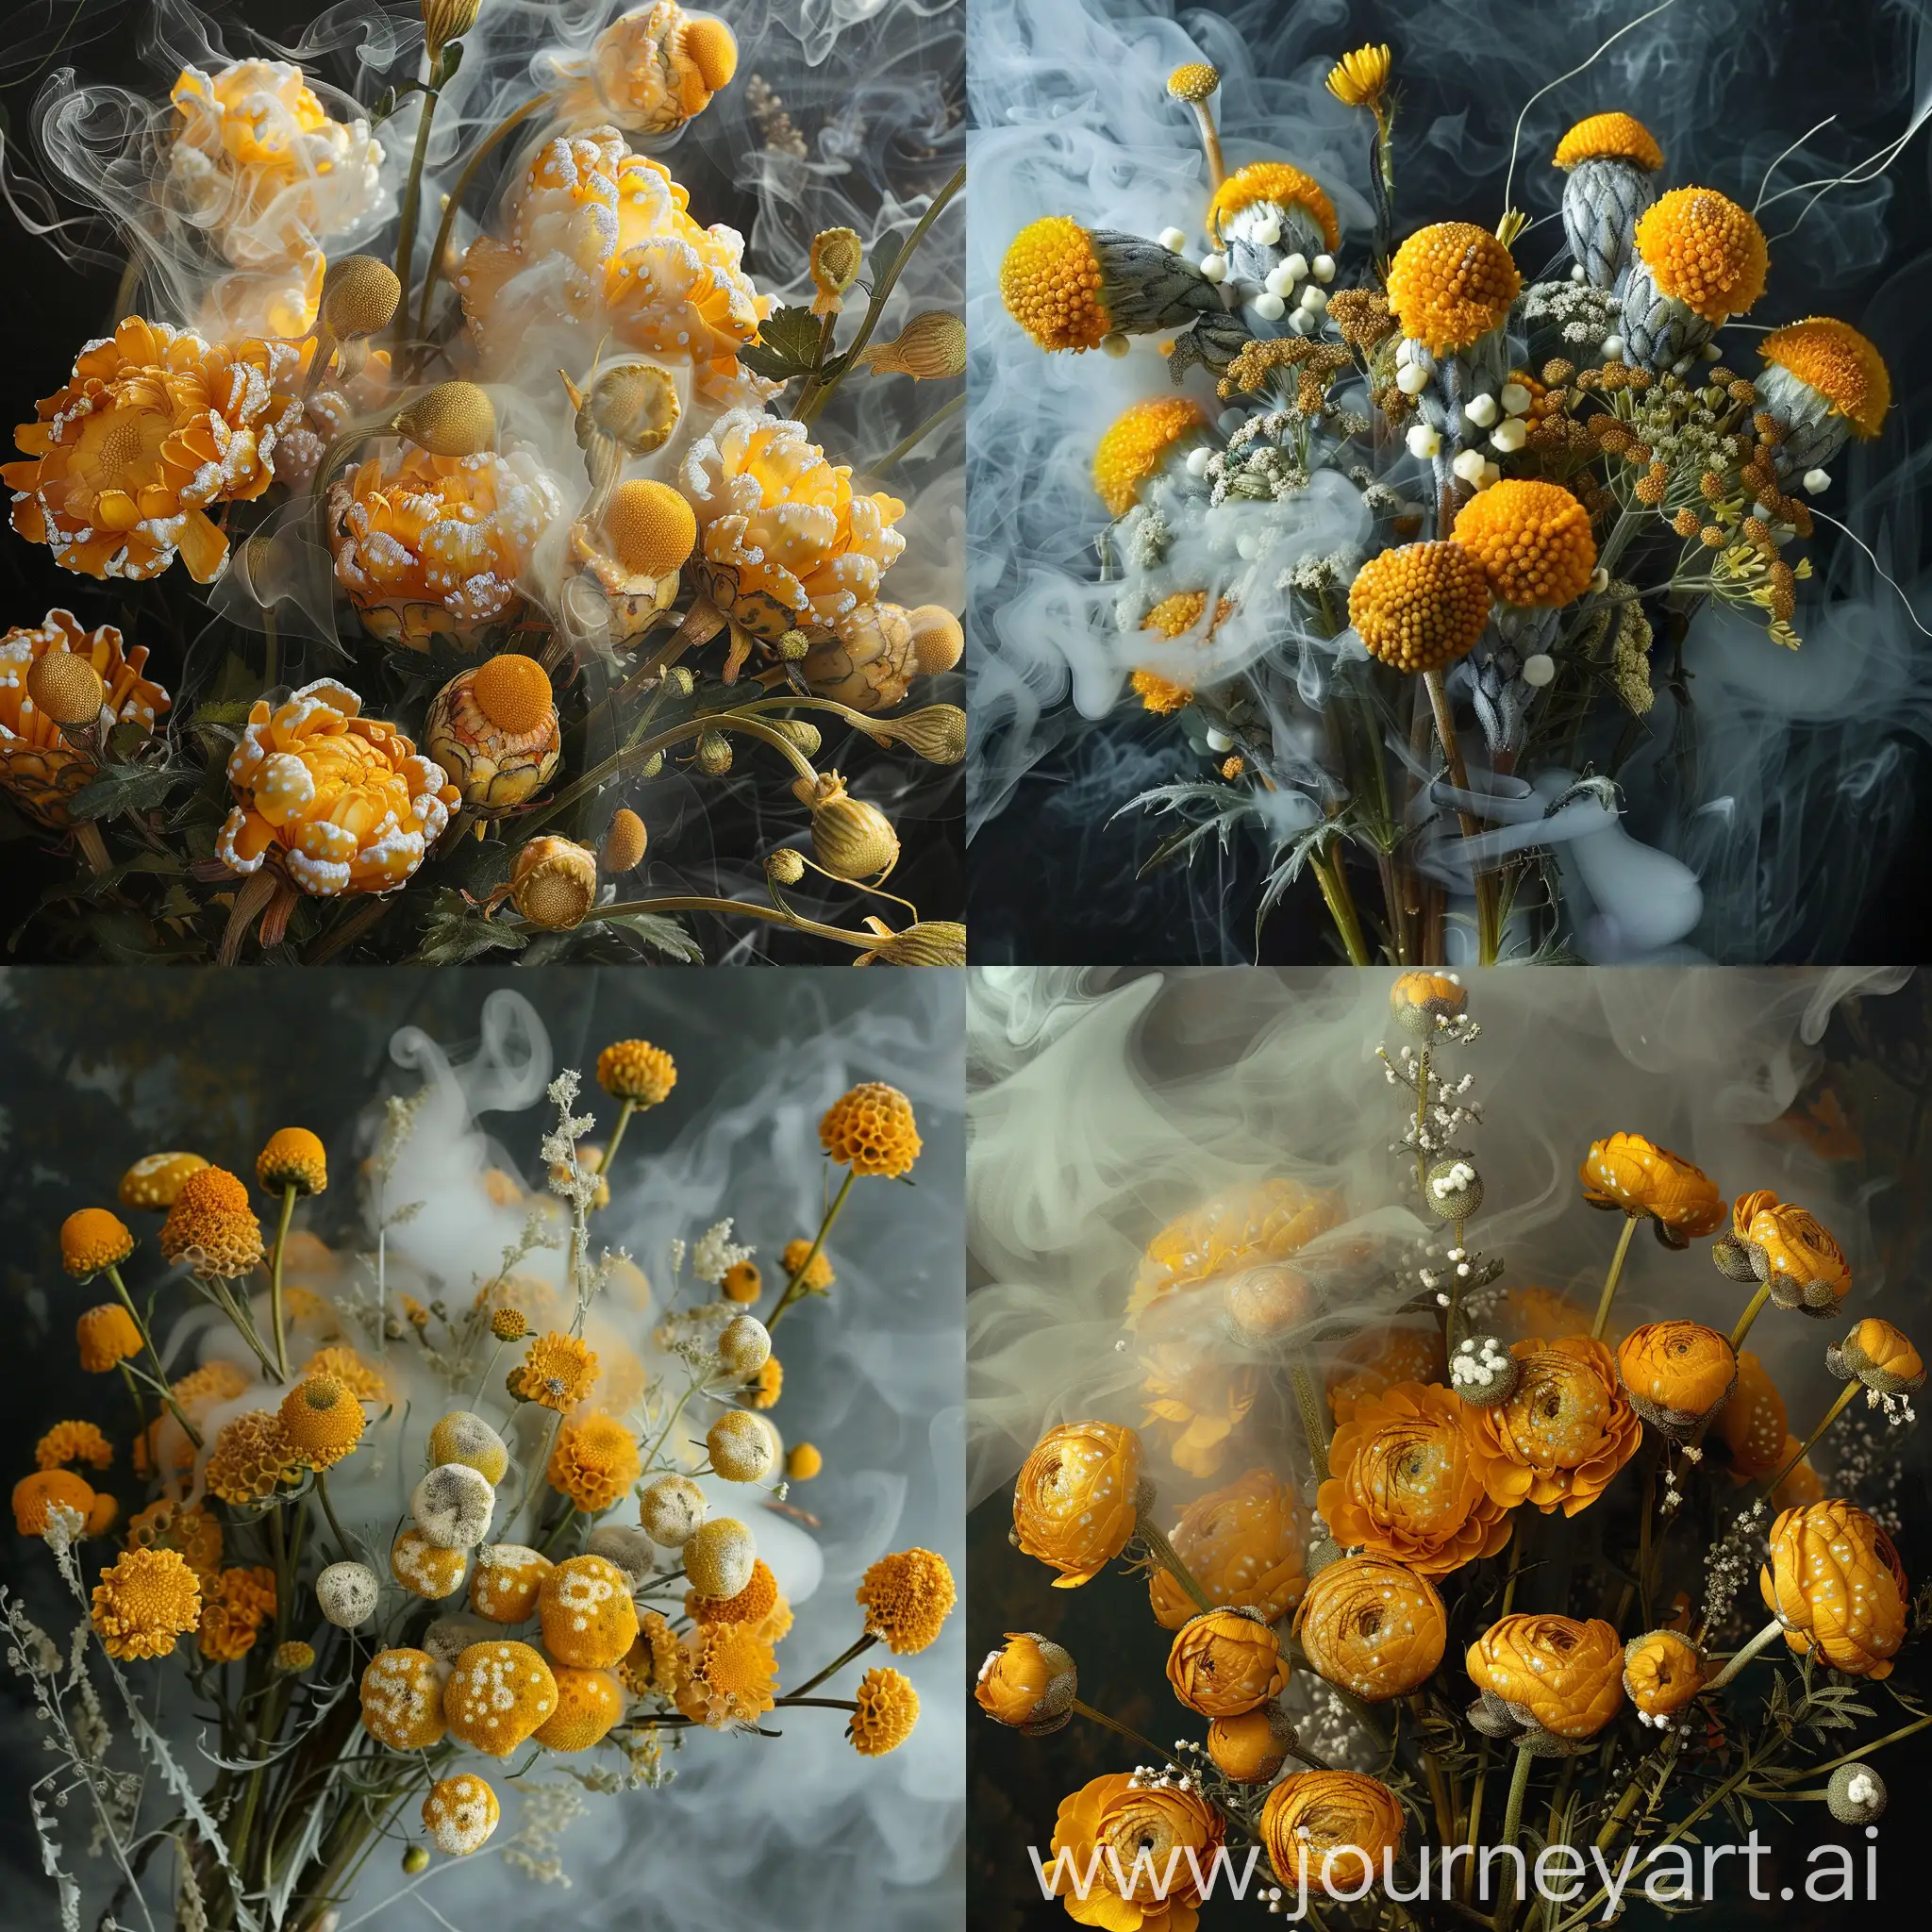 Vibrant-YellowHeaded-Flowers-Bouquet-in-Ethereal-Smoke-with-White-Speckles